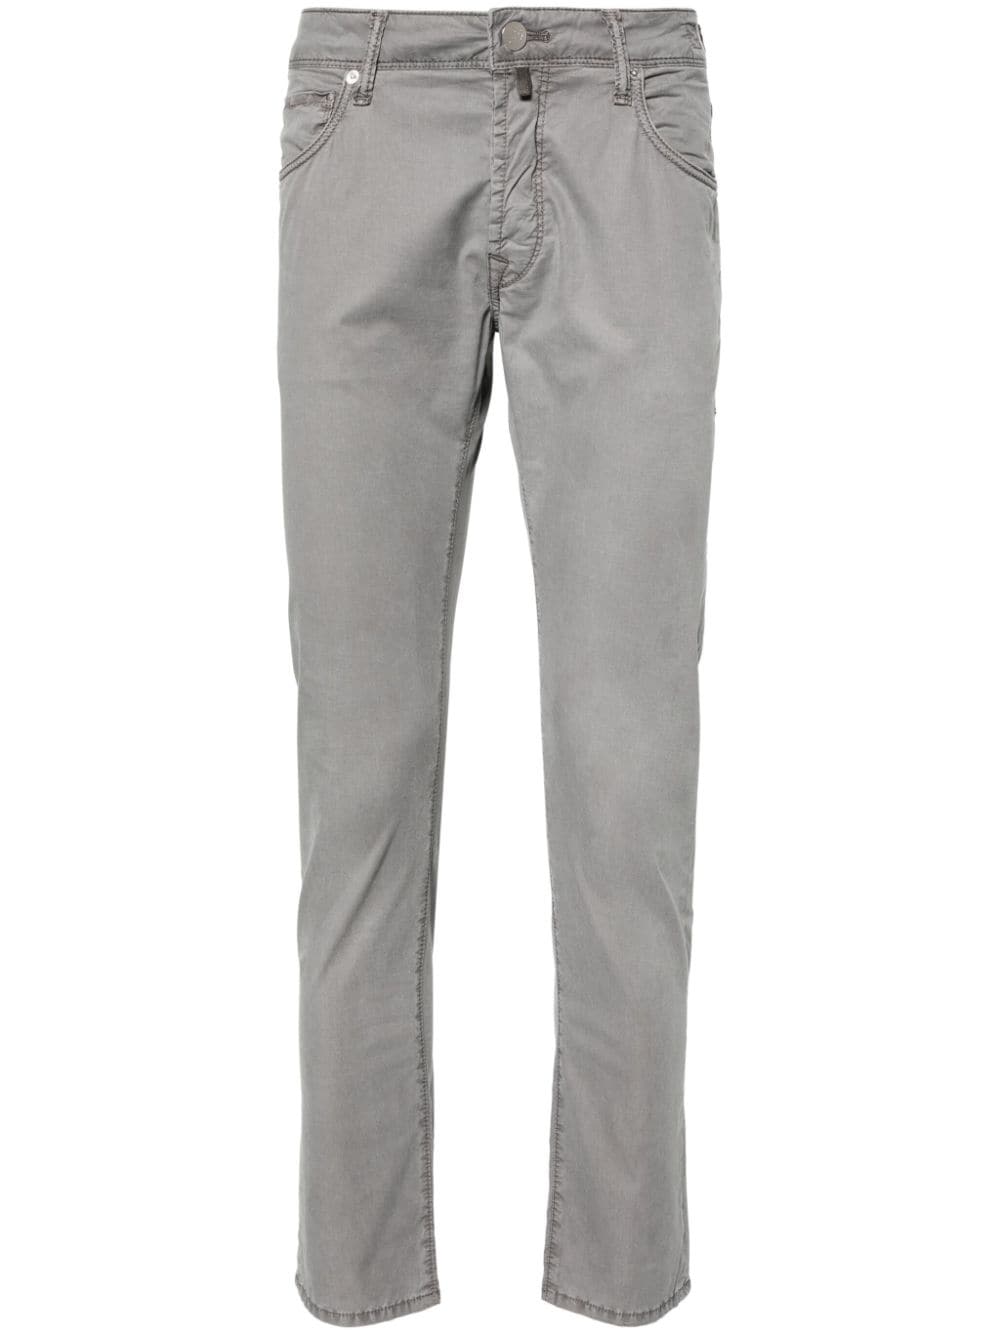 low-rise slim-fit trousers